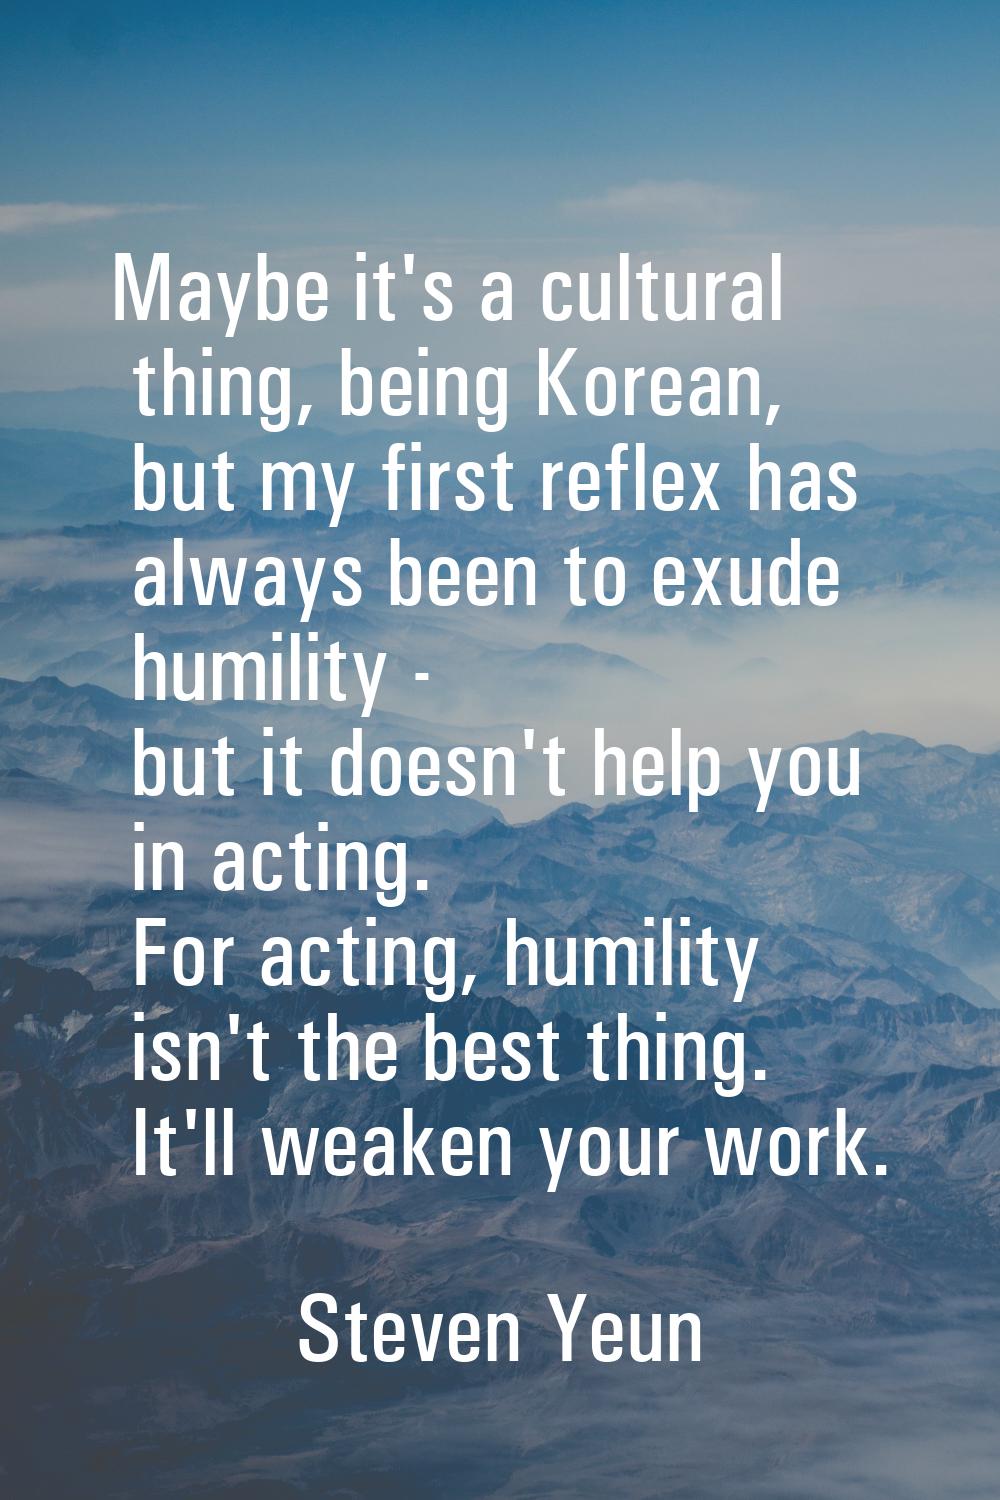 Maybe it's a cultural thing, being Korean, but my first reflex has always been to exude humility - 